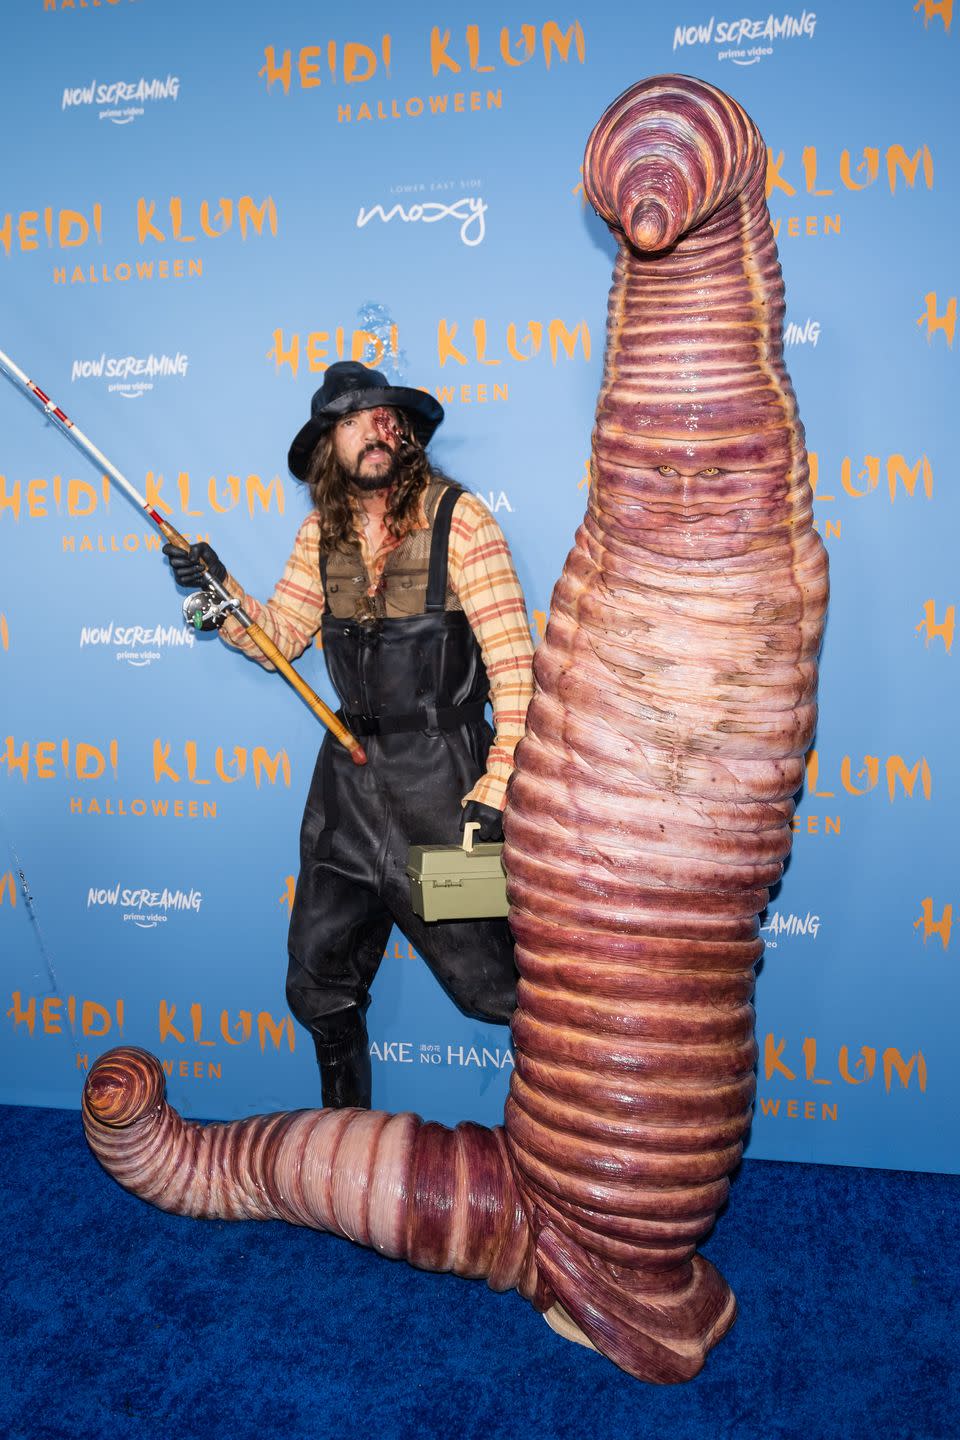 Heidi Klum's Viral Worm Halloween 2022 Costume Was Two Years in the Making